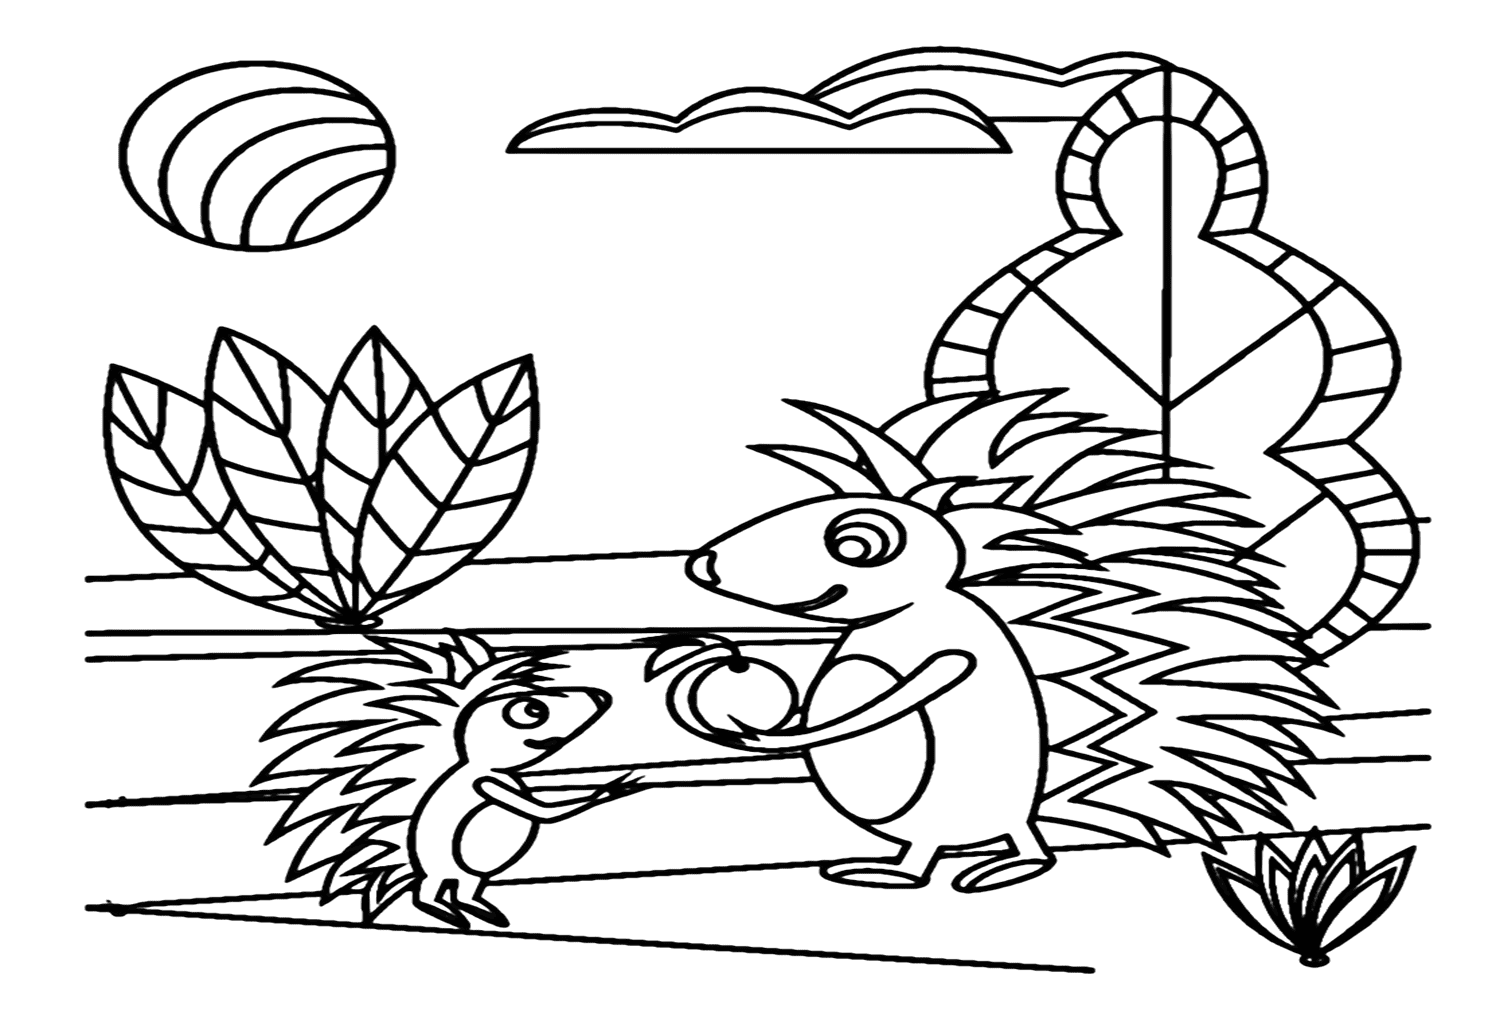 Porcupine Coloring Page For Kids from Porcupine